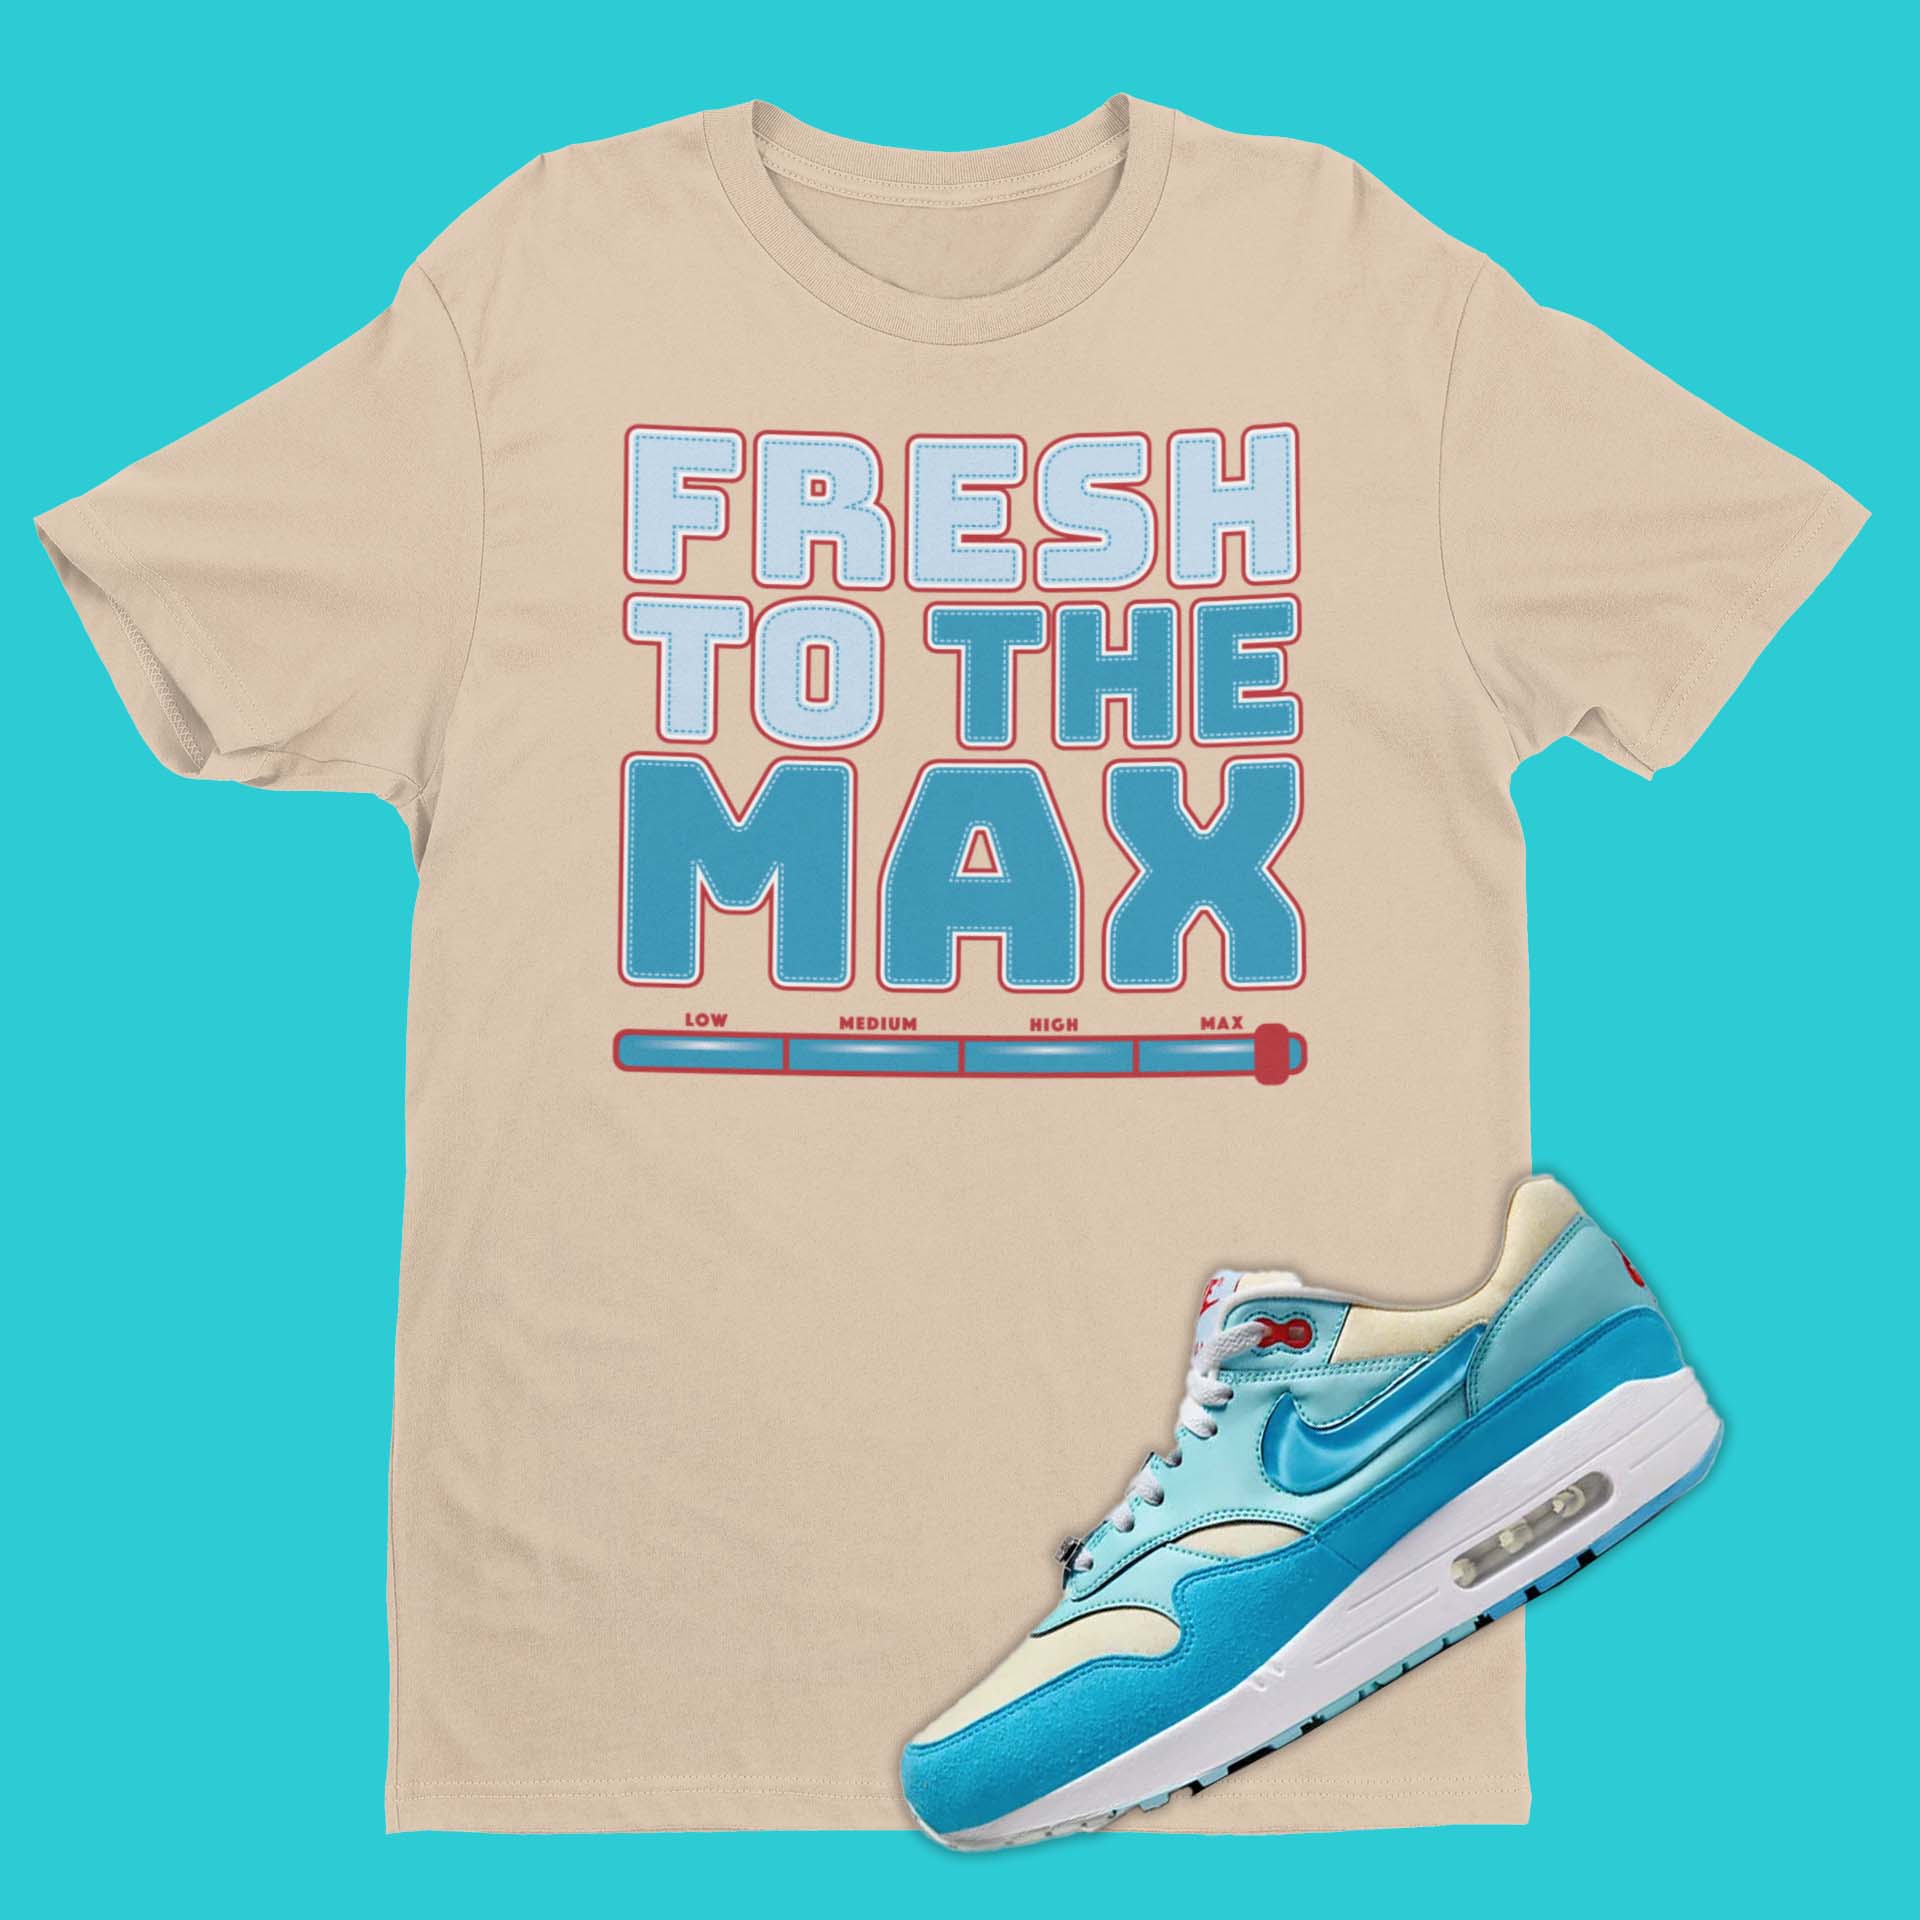 Nike Air Max 1 Blue Gale | Fresh To The Max Unisex Shirts | SNKADX Sneaker Tees - SNKADX Sneaker T-Shirts